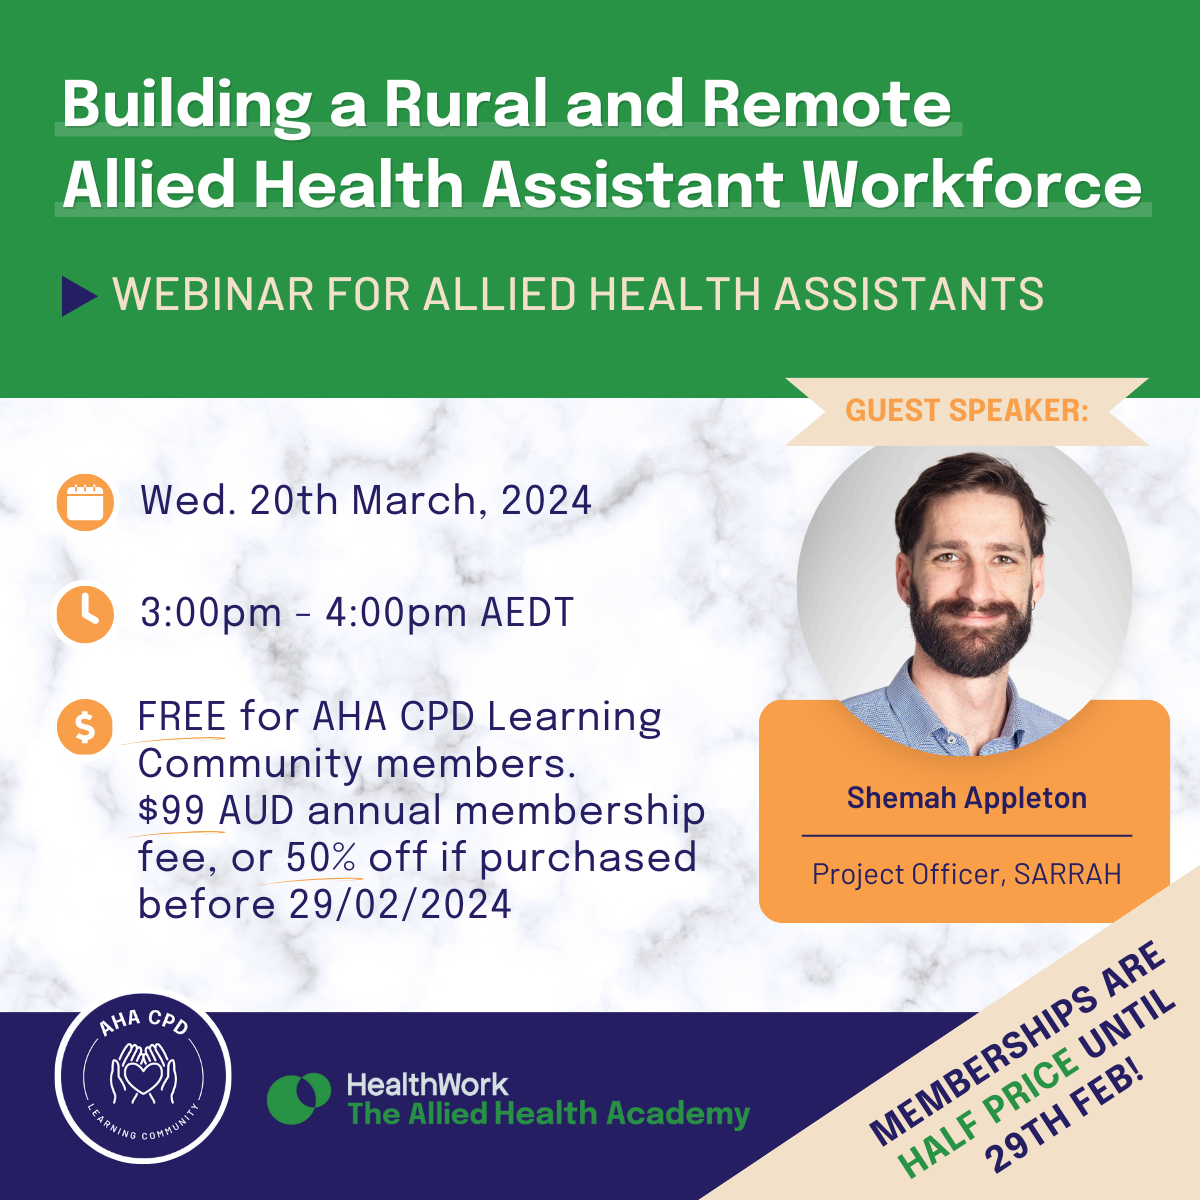 Building a Rural and Remote Allied Health Assistant Workforce - CPD Webinar for Allied Health Assistants